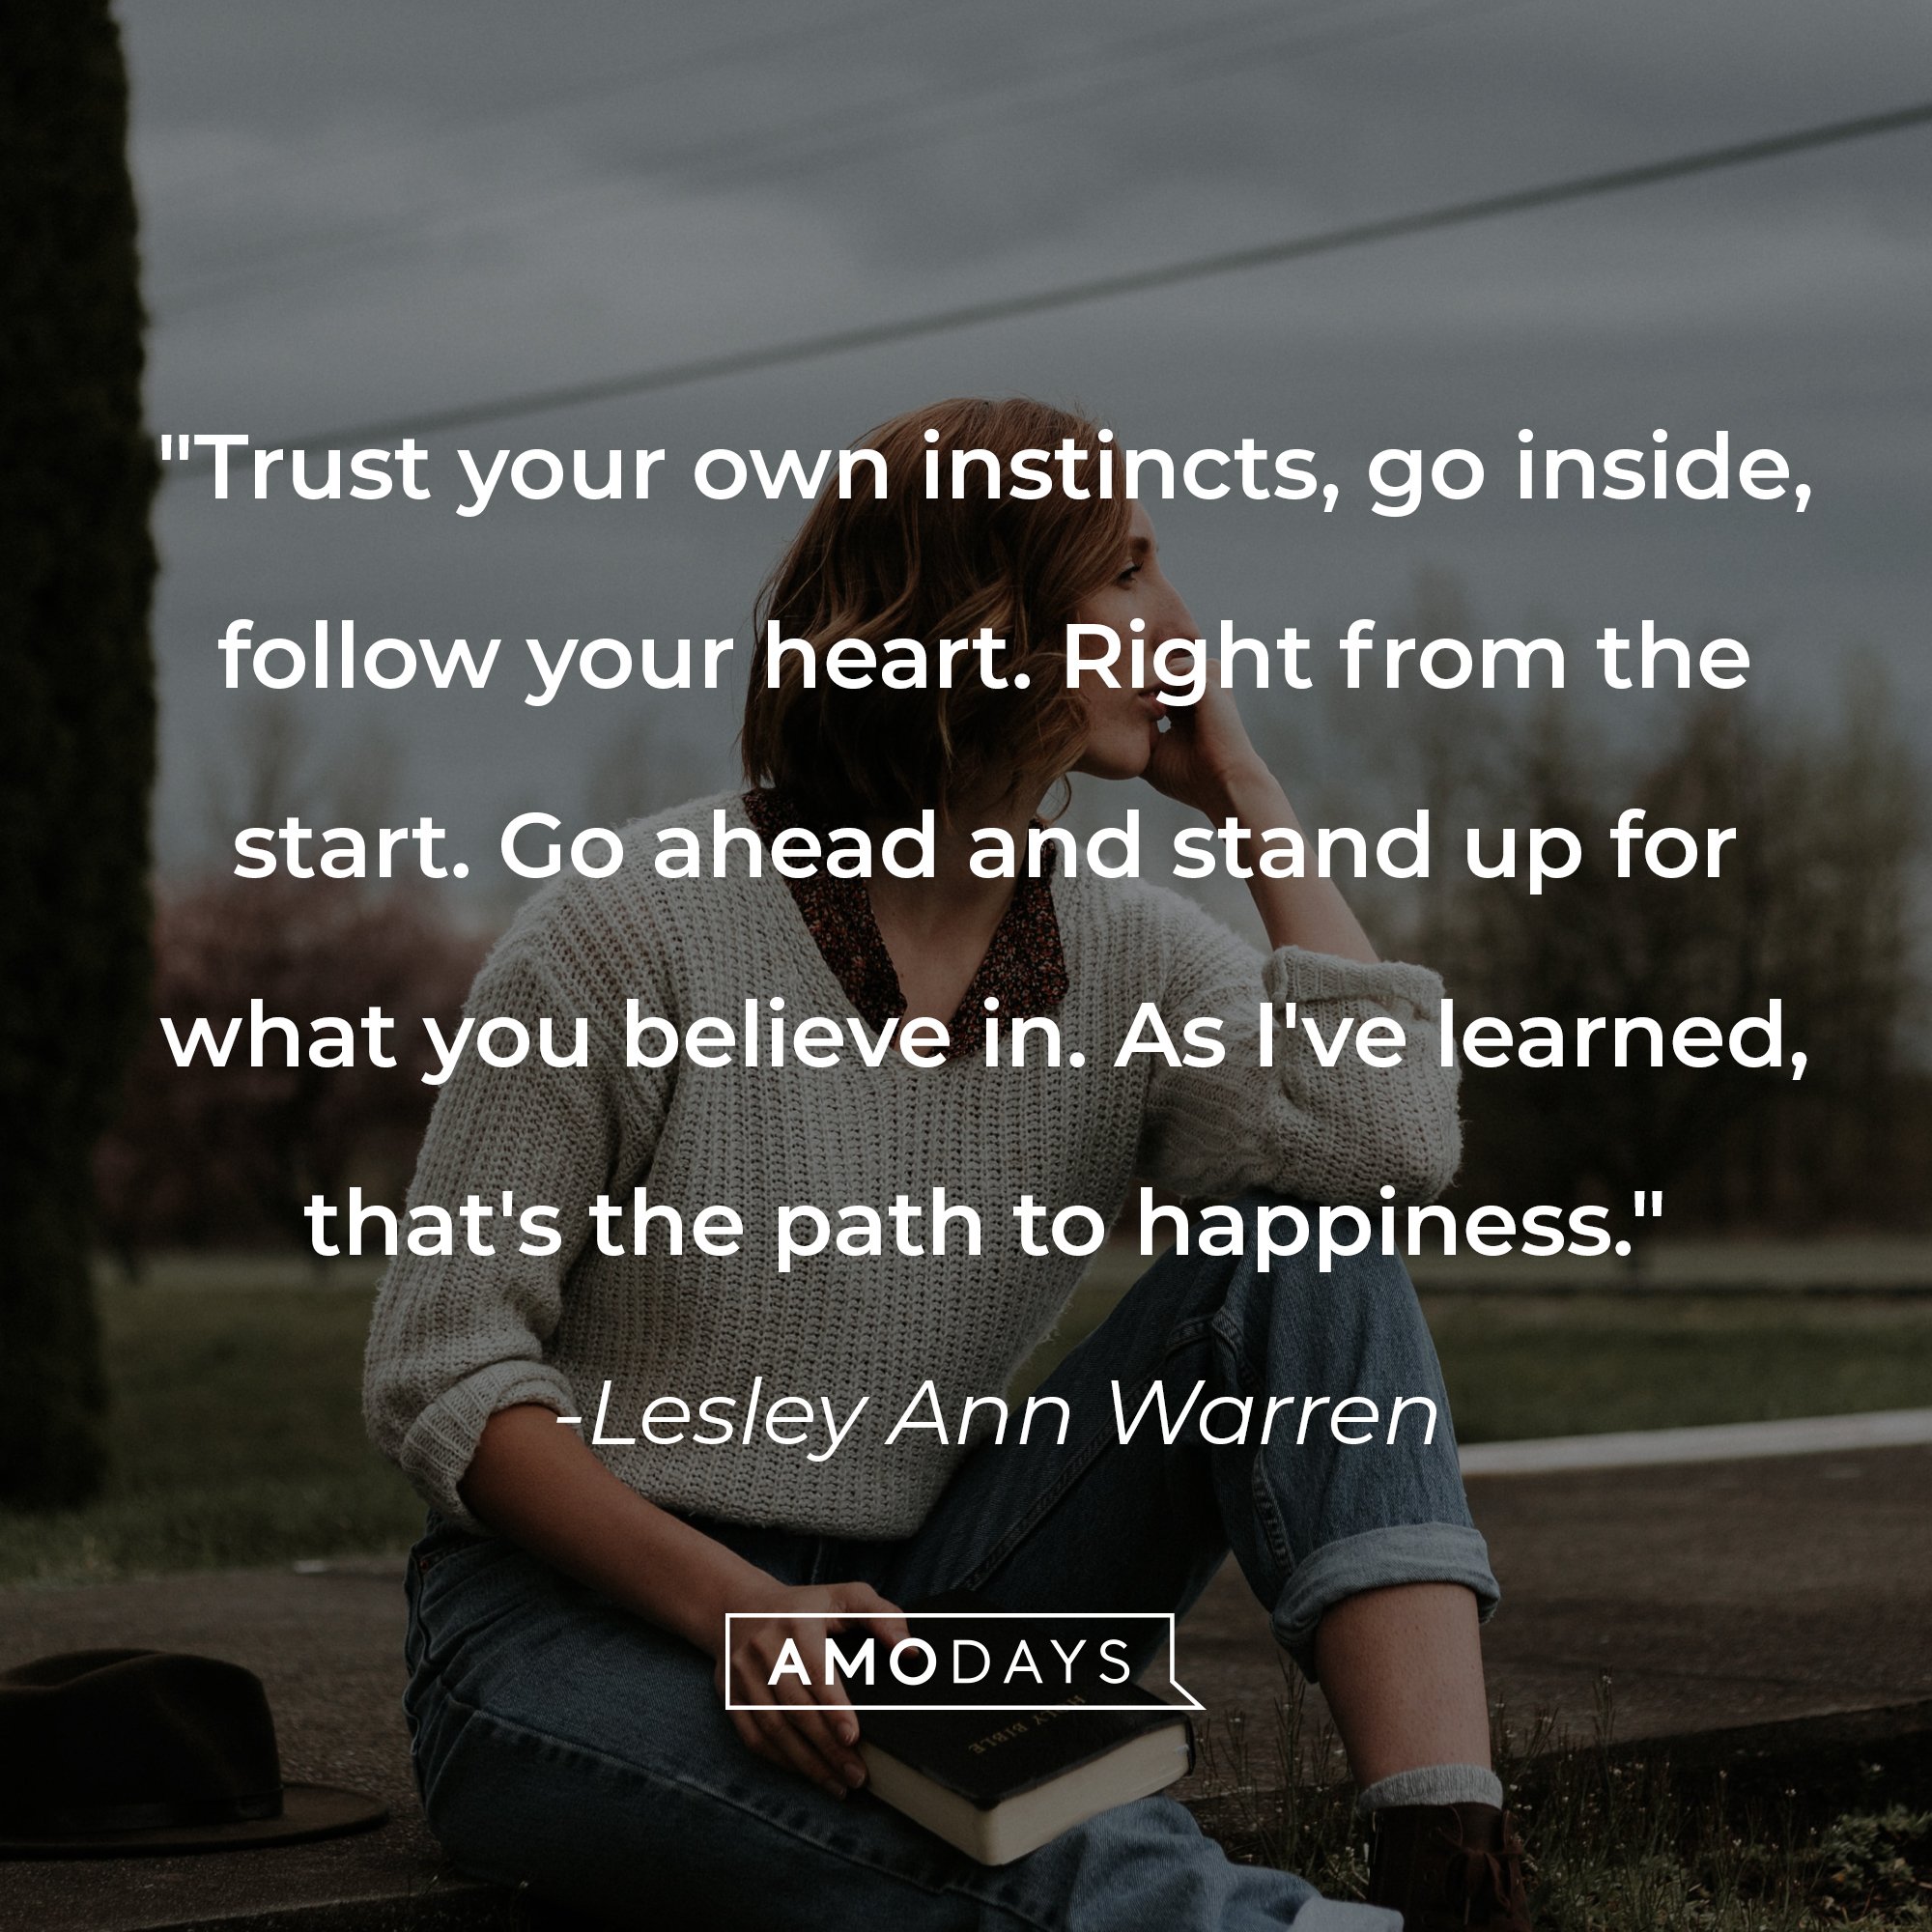 Lesley Ann Warren's quote: "Trust your own instincts, go inside, follow your heart. Right from the start. Go ahead and stand up for what you believe in. As I've learned, that's the path to happiness." | Image: AmoDays